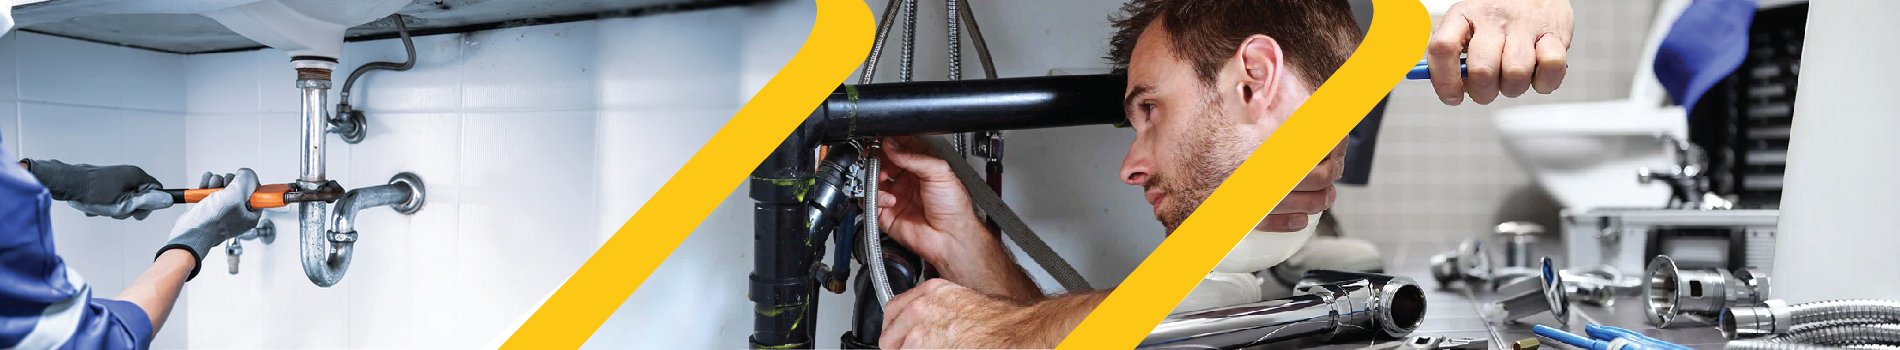 plumber services in lahore